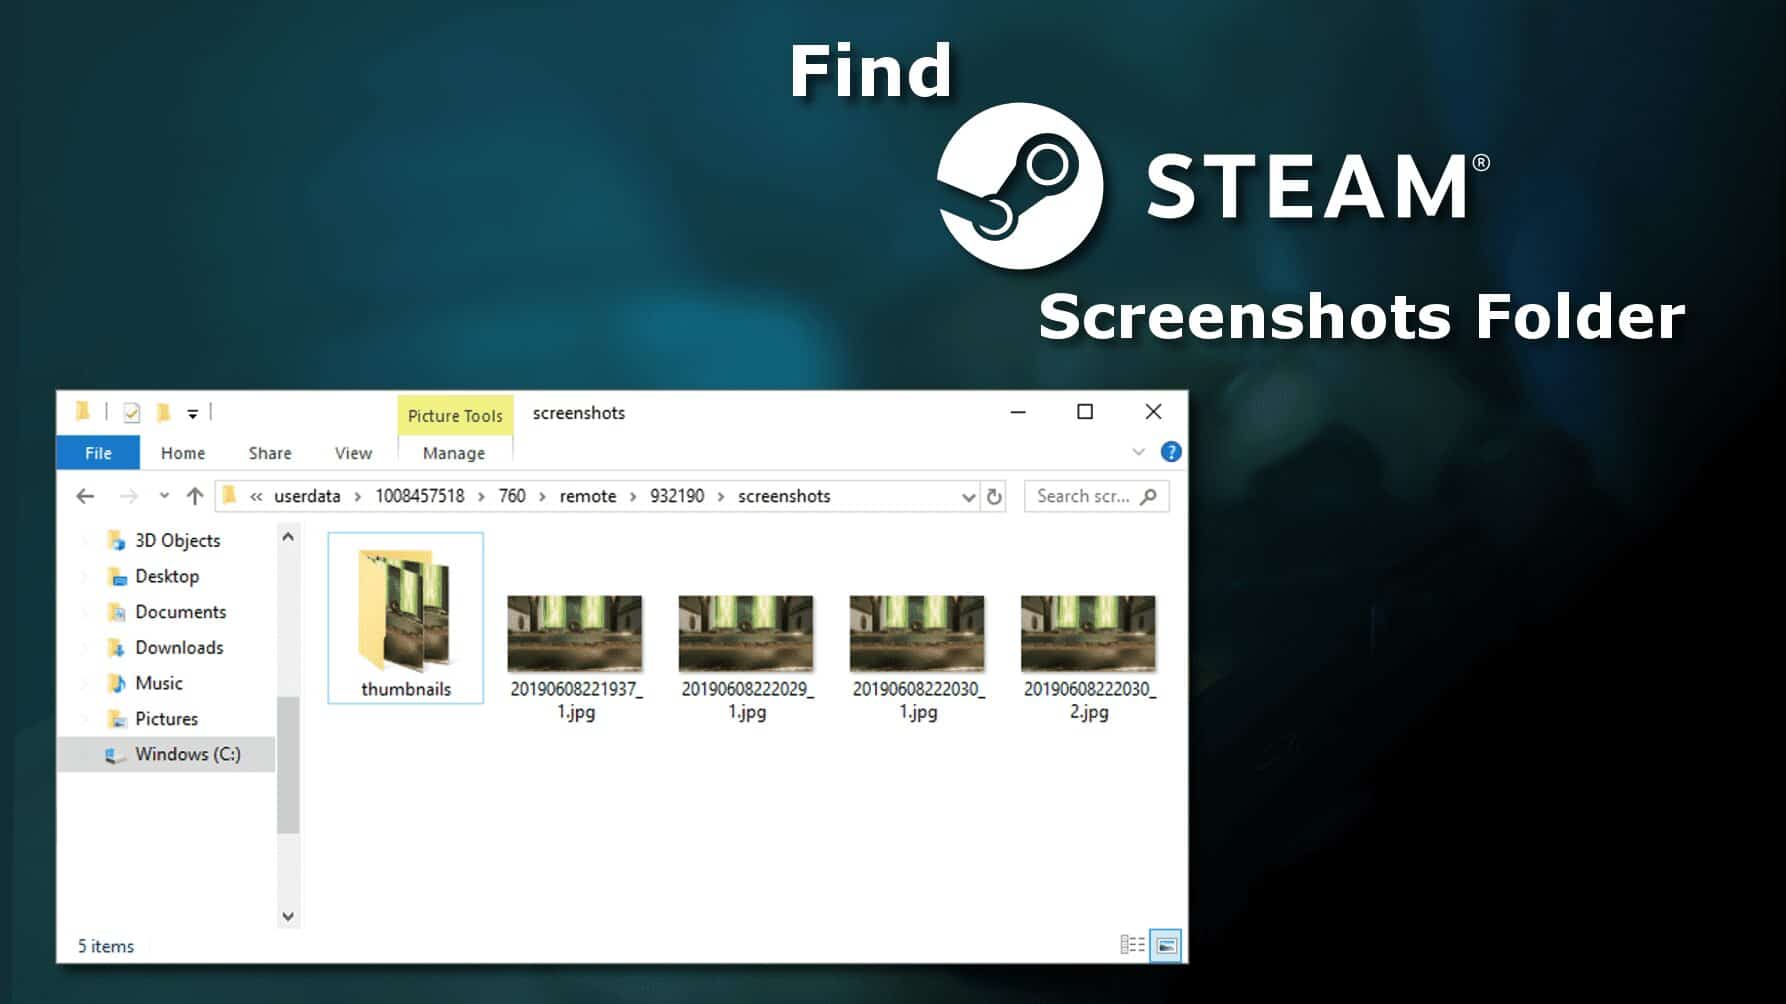 find the steam workshop file that is downloading